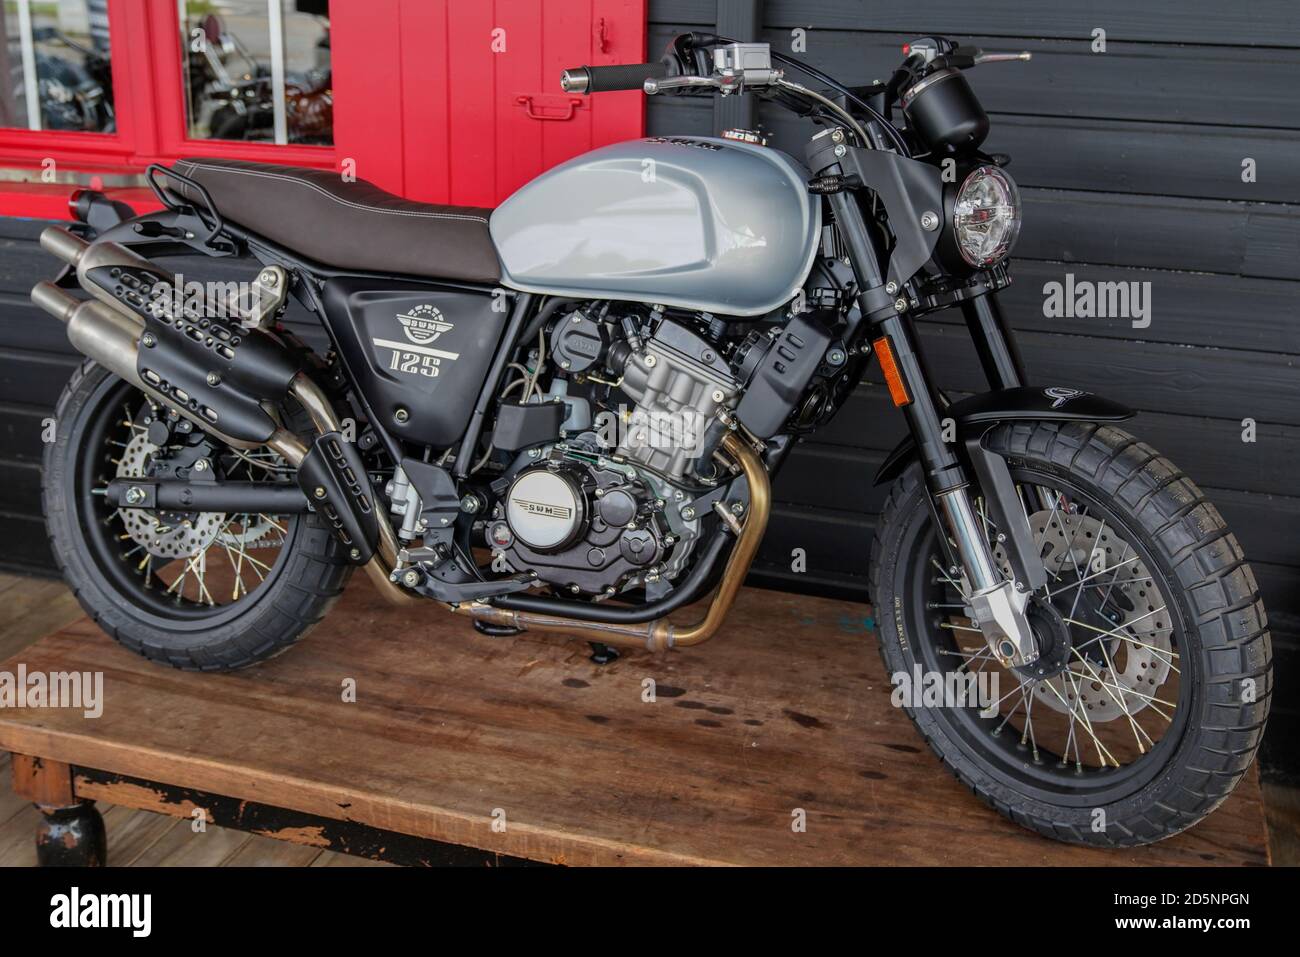 Bordeaux , Aquitaine / France - 10 01 2020 : SWM Motorcycle Manufacturer  side view ACE OF SPADES 125 Stock Photo - Alamy